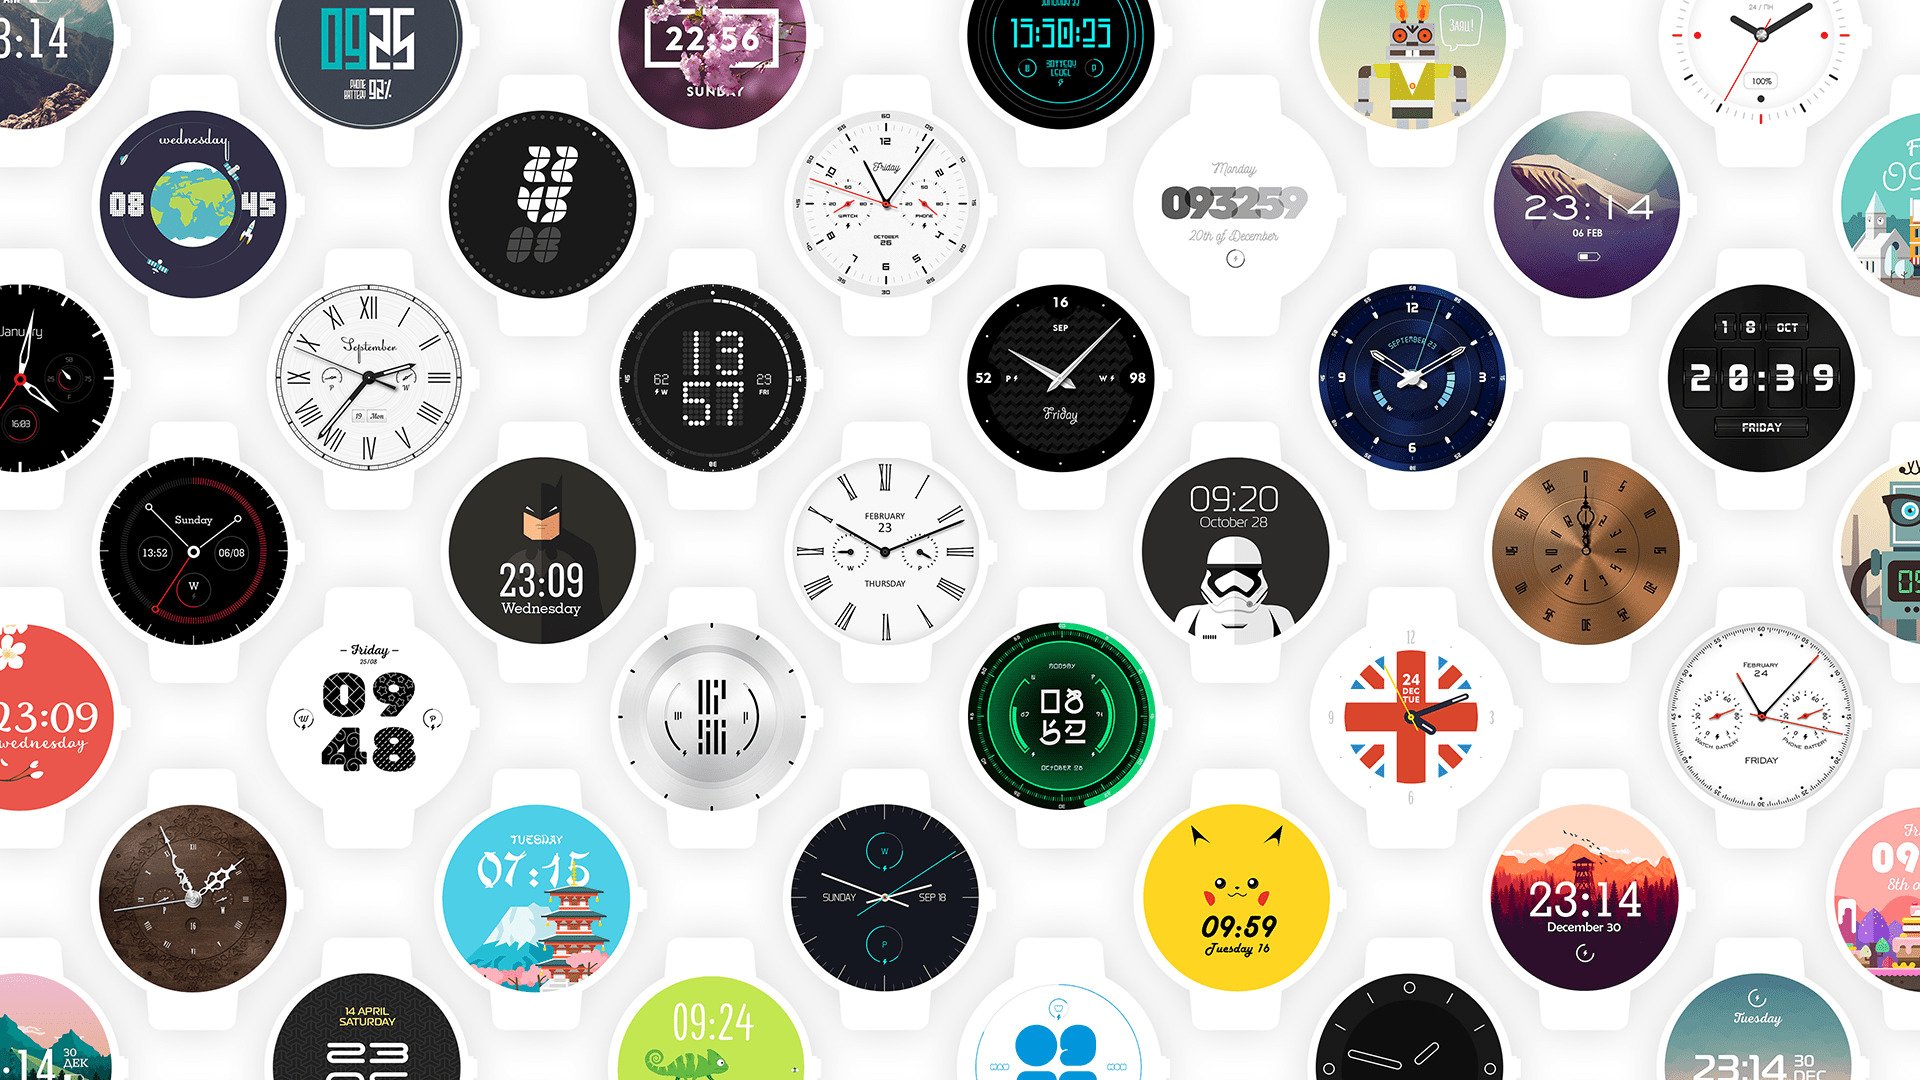 Watch Faces For Android Wear